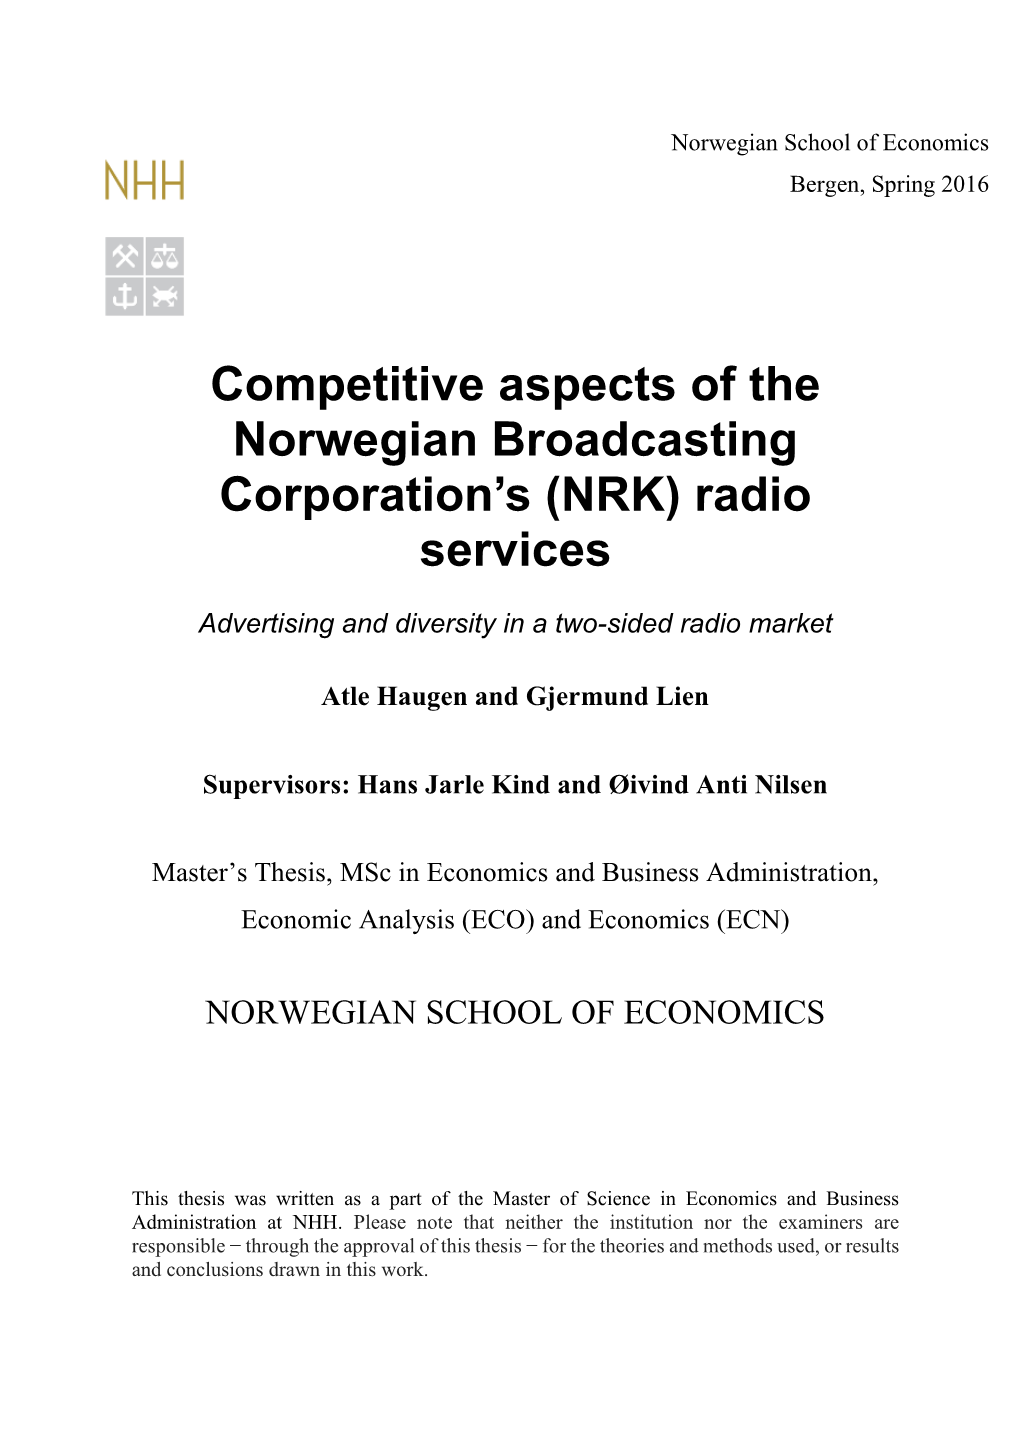 Haugen Og Lien (2016). Competitive Aspects of the Norwegian Broadcasting Corporation's Radio Services